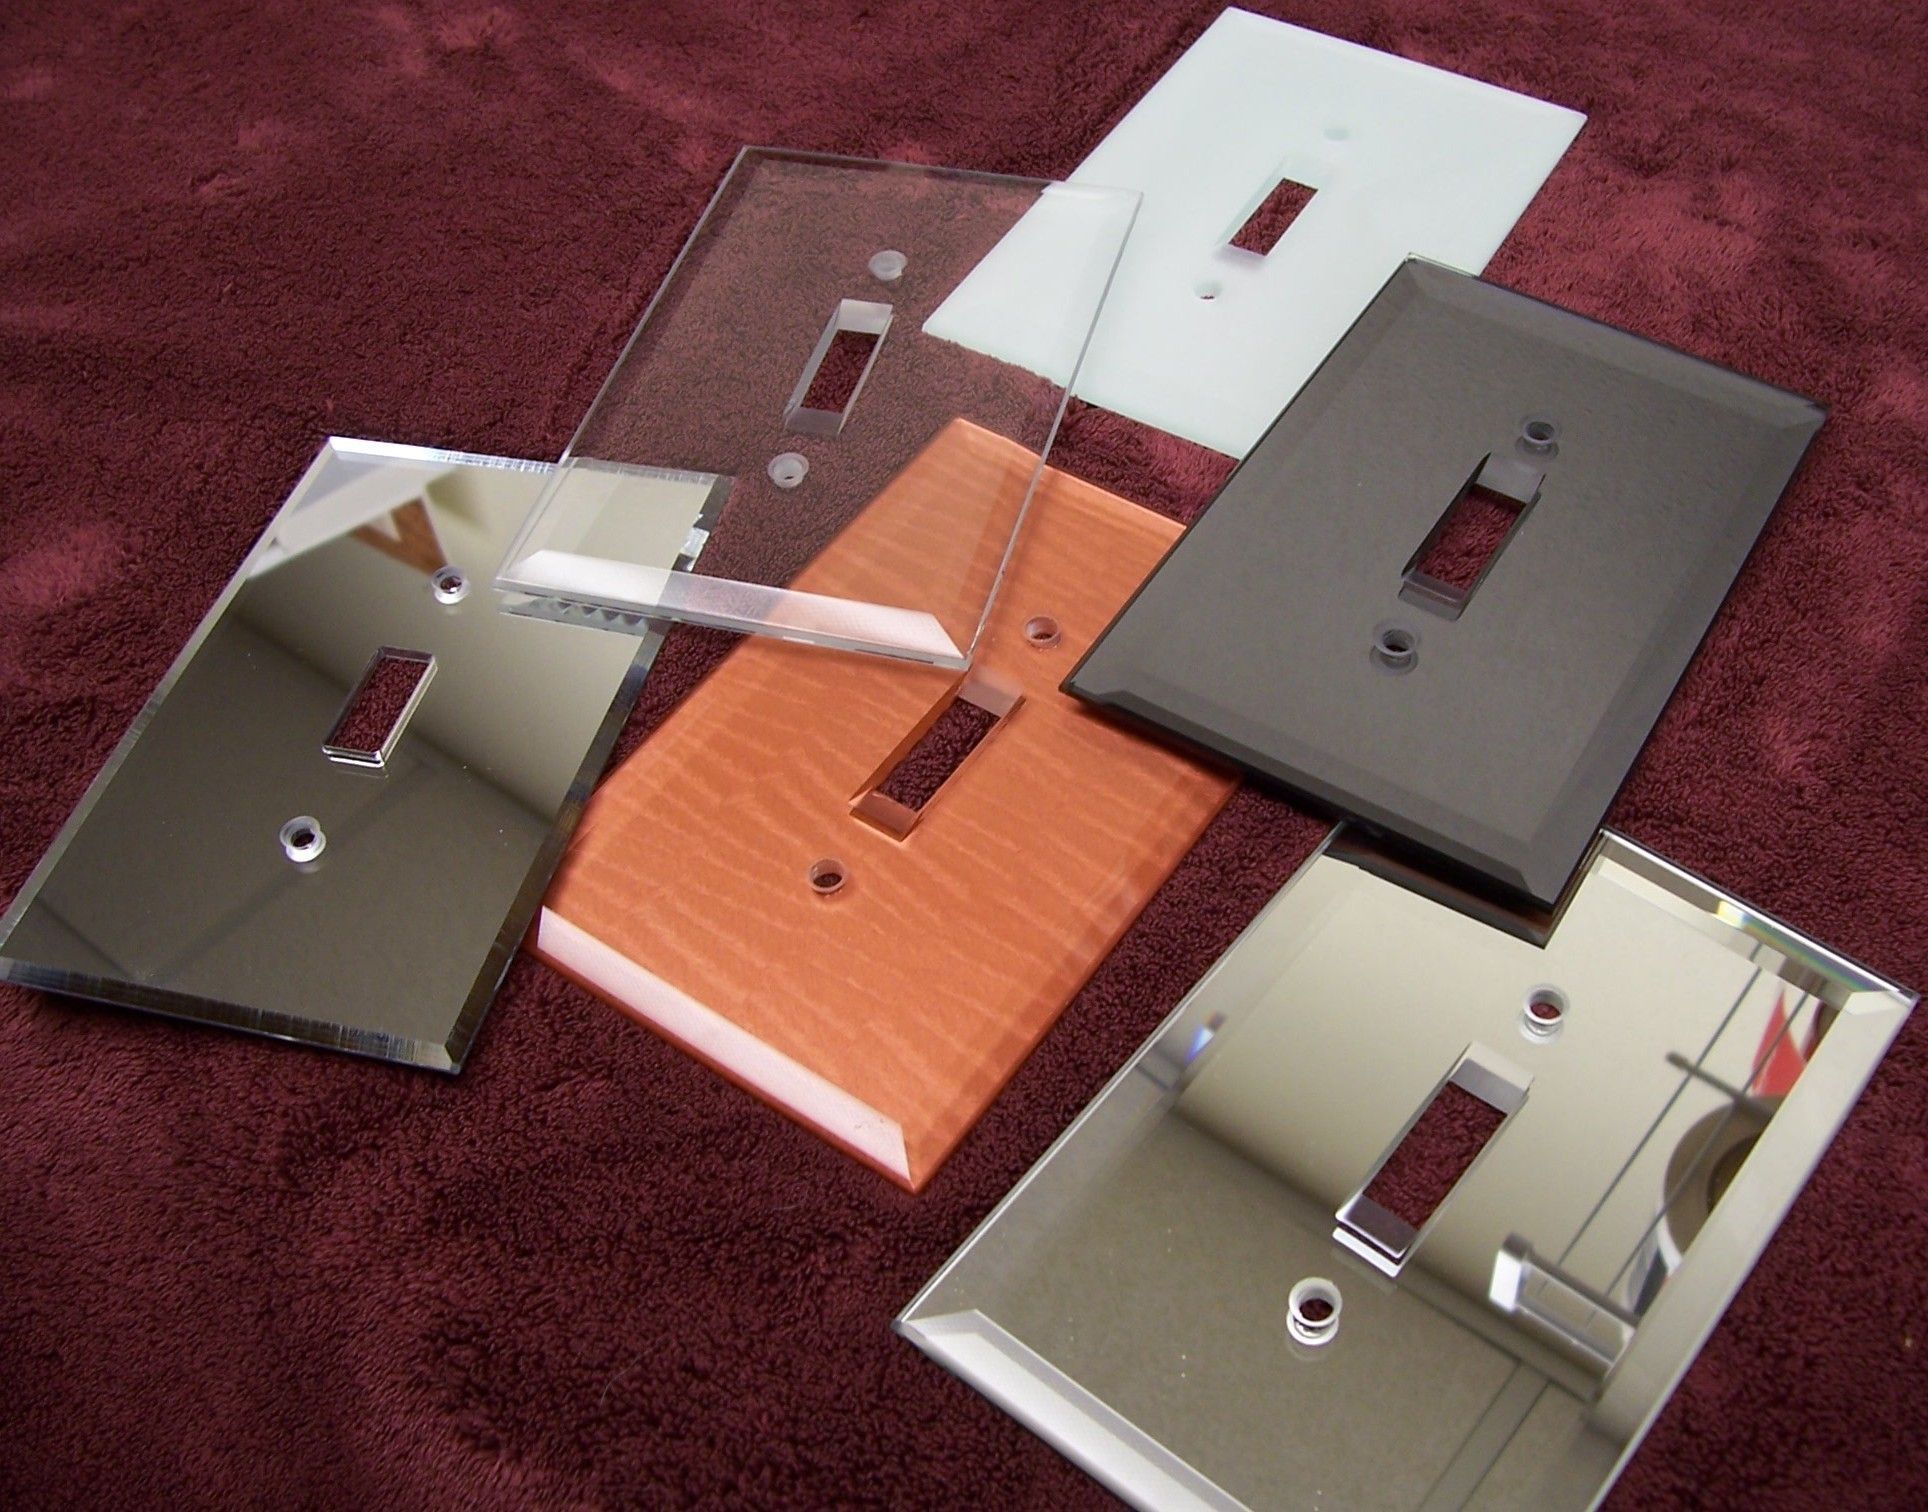 Mirrored glass switch plates in many styles and colors